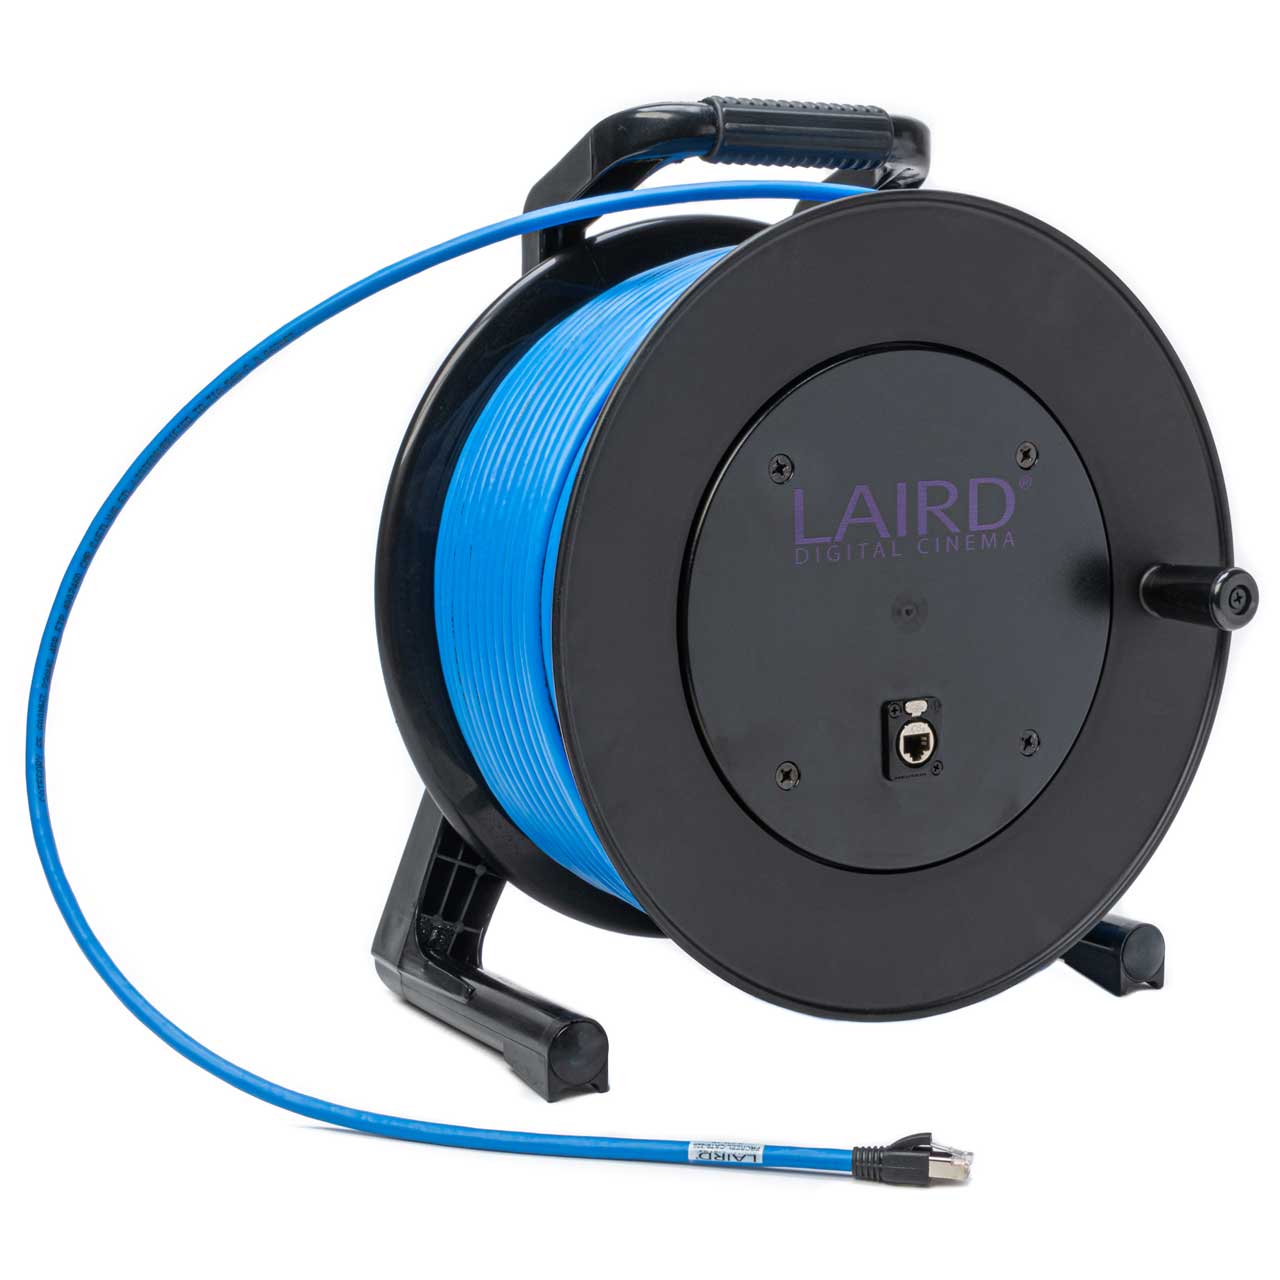  Laird ProReel Series 328' CAT6 Integrated Cable Reel with  Built-in RJ45 Jack in Hub : Electronics